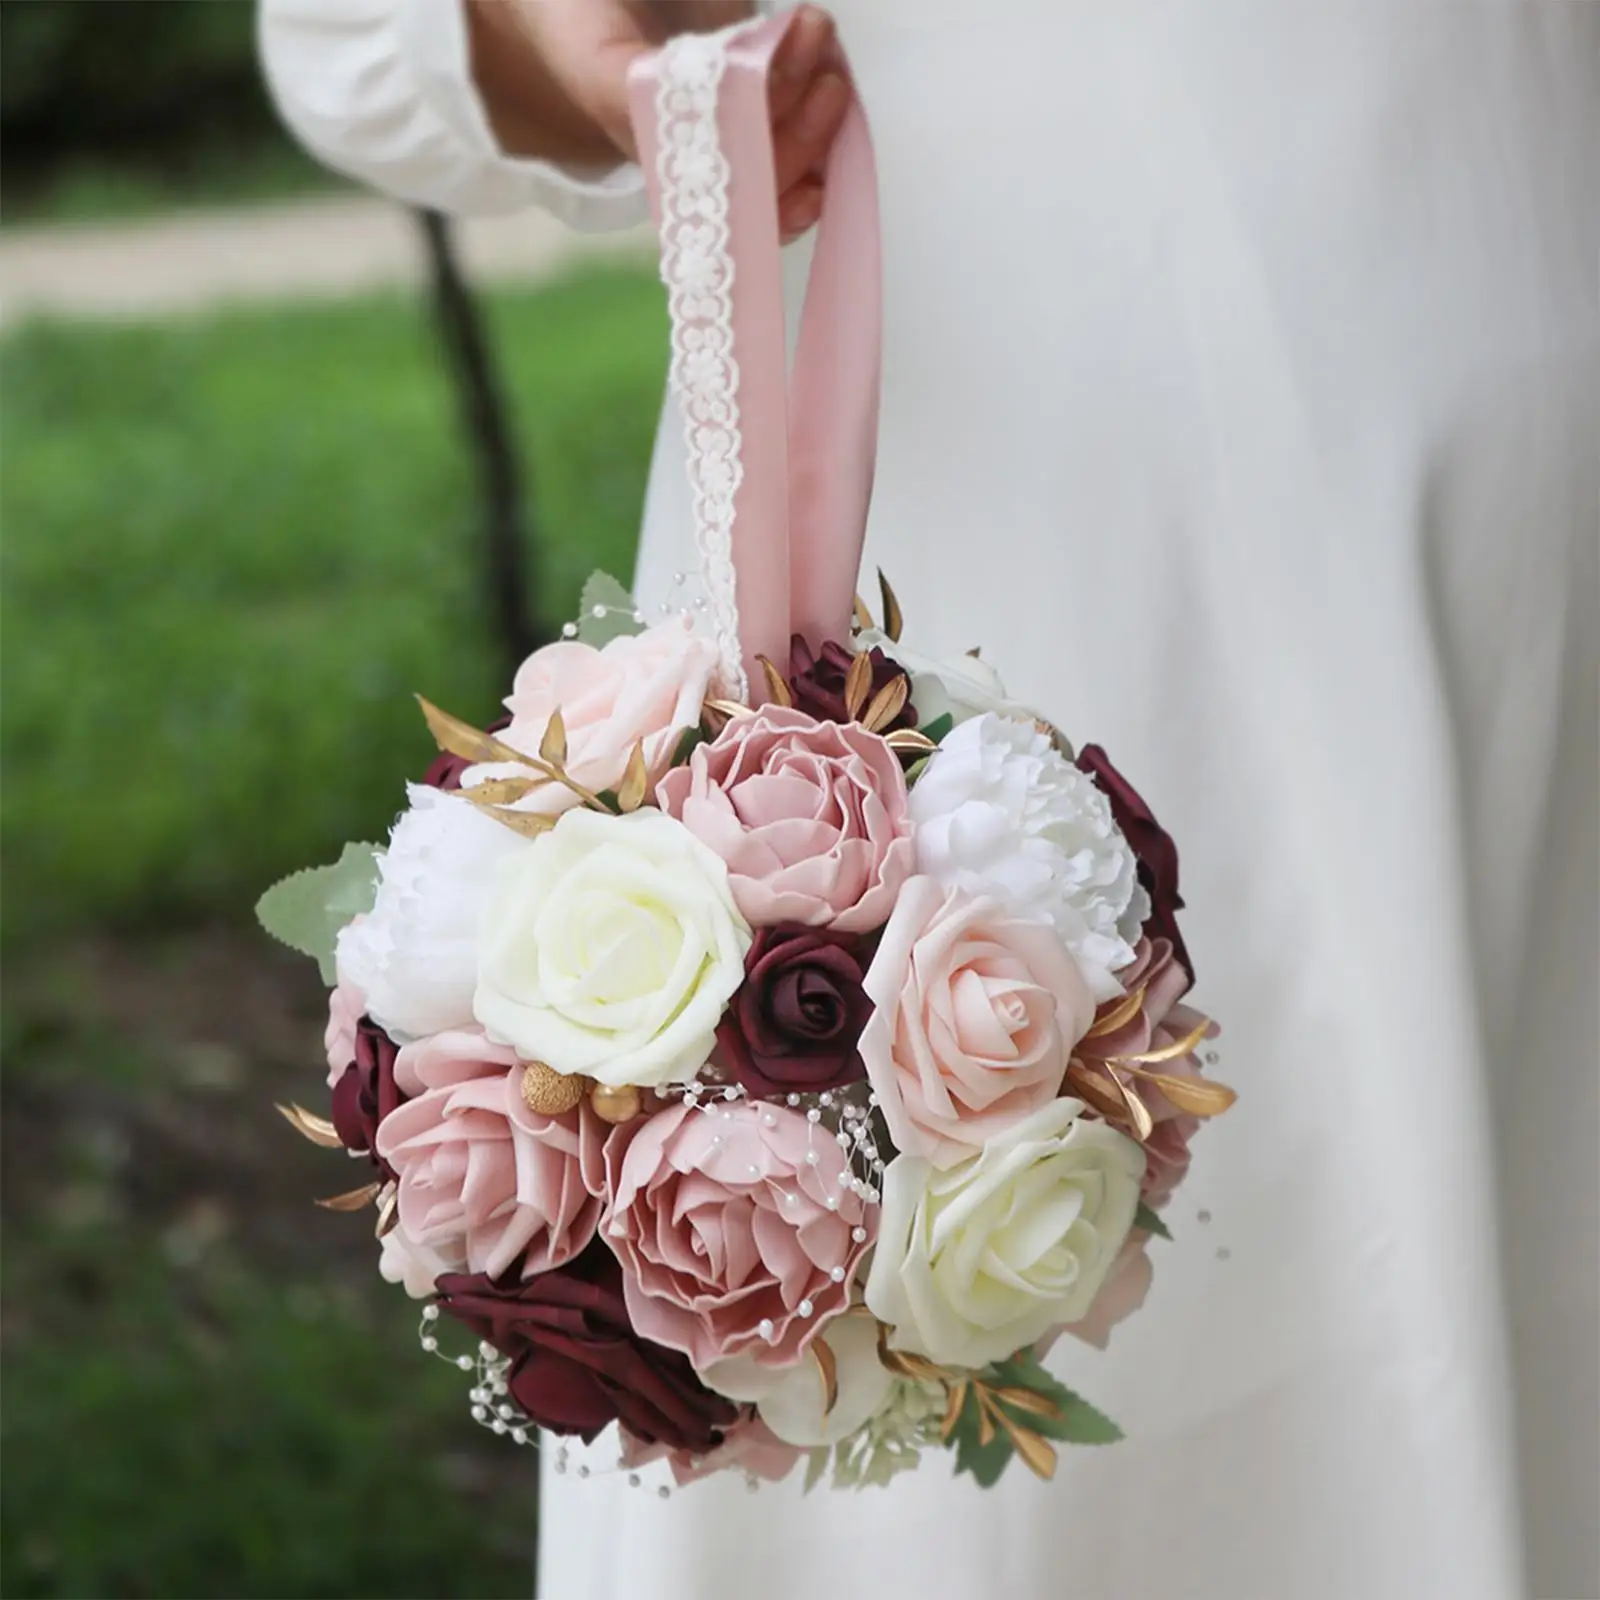 Bridal Bouquet Silk Flower Bridesmaid Holding Flowers Rustic for Church Ceremony